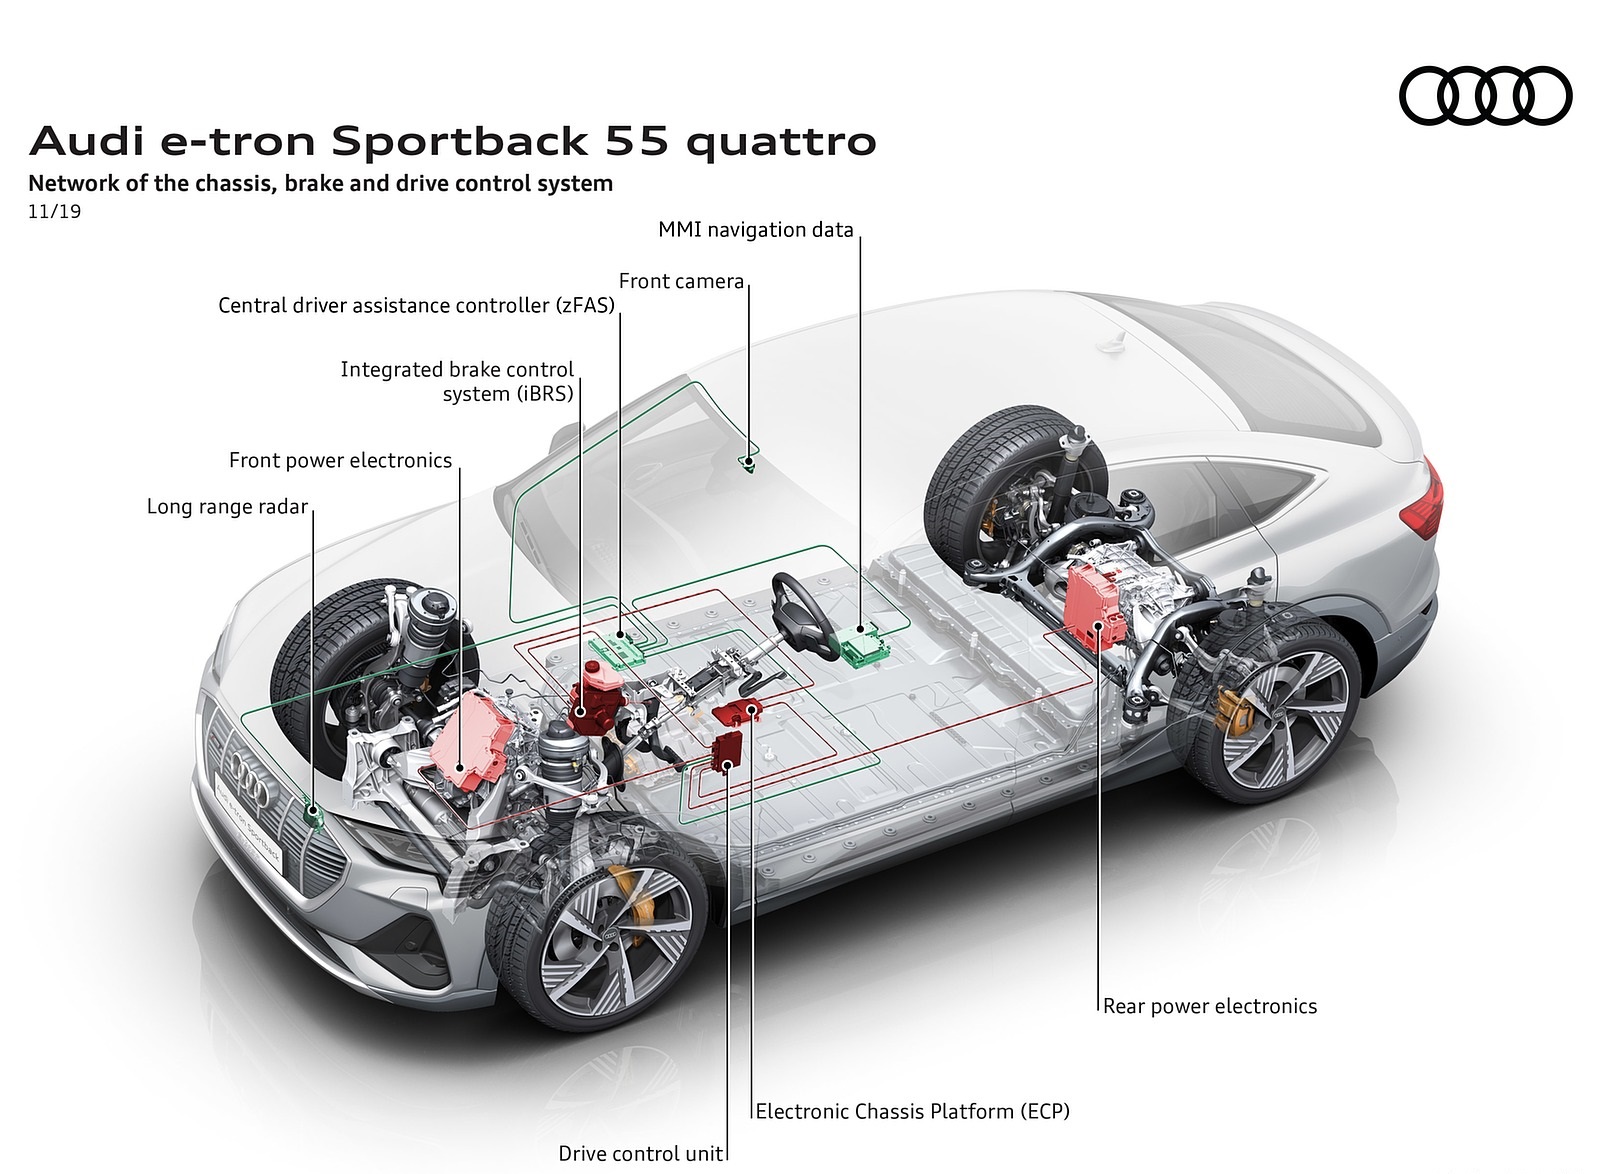 2020 Audi e-tron Sportback Network of the Chassis brake and drive control system Wallpapers #109 of 145